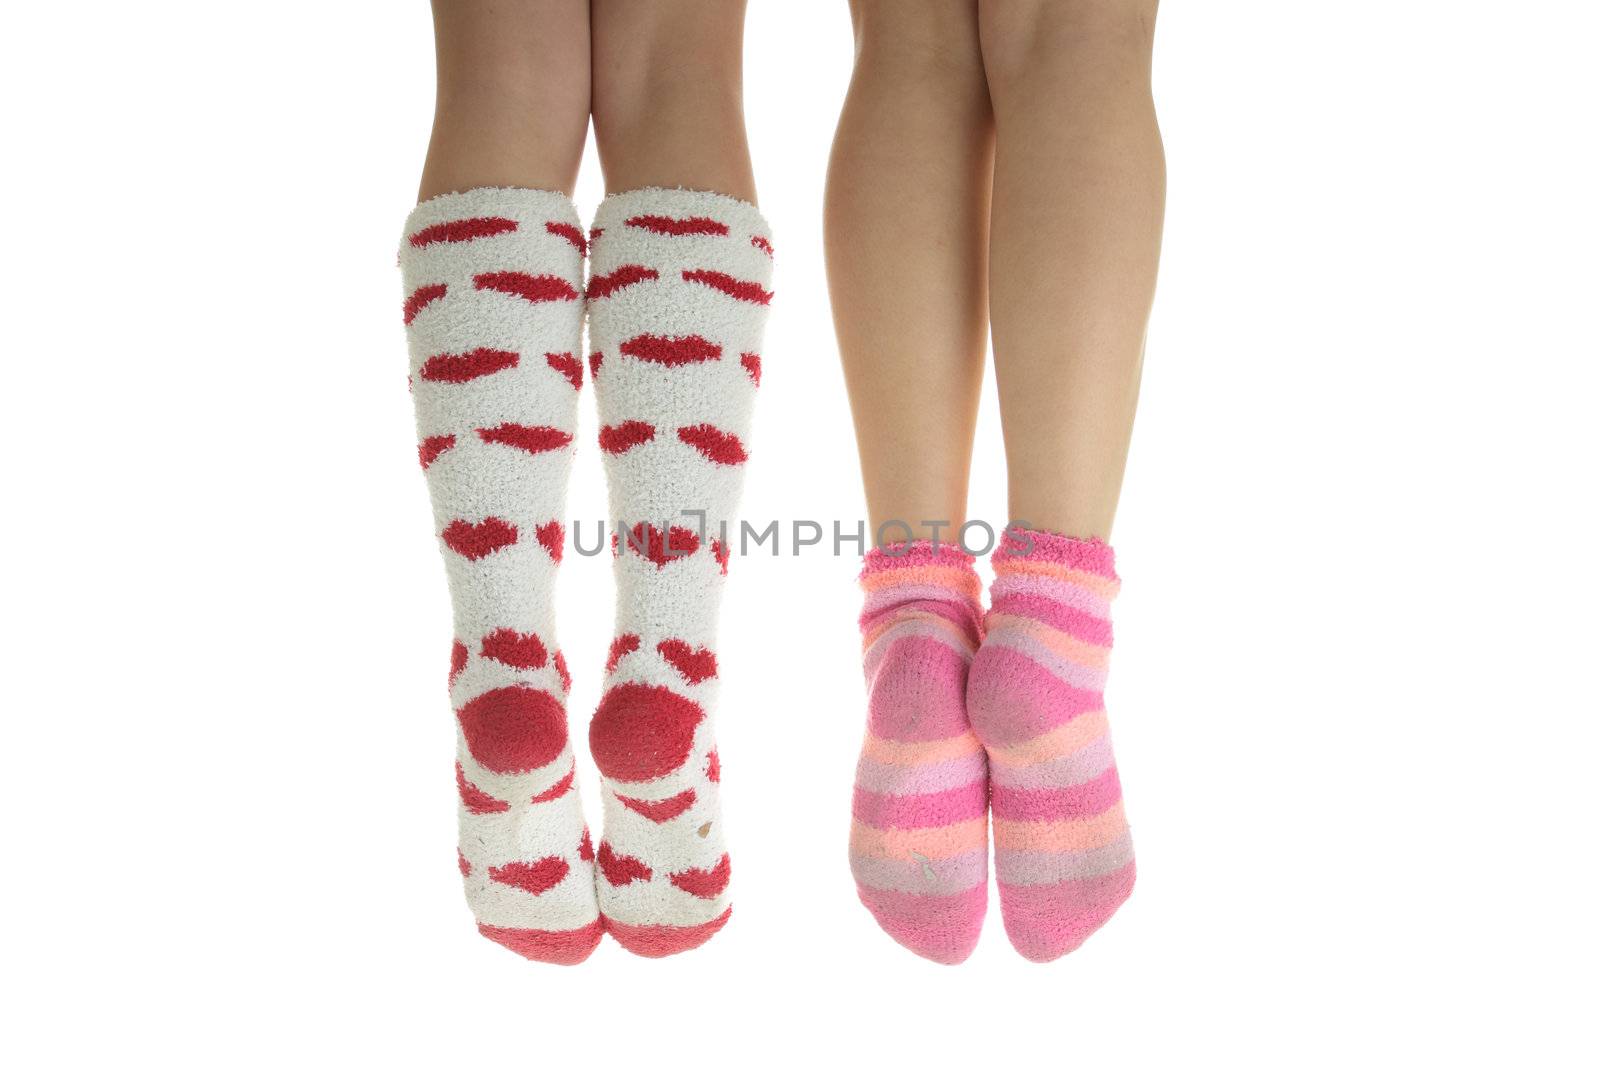 Four legs with colorful socks by BDS